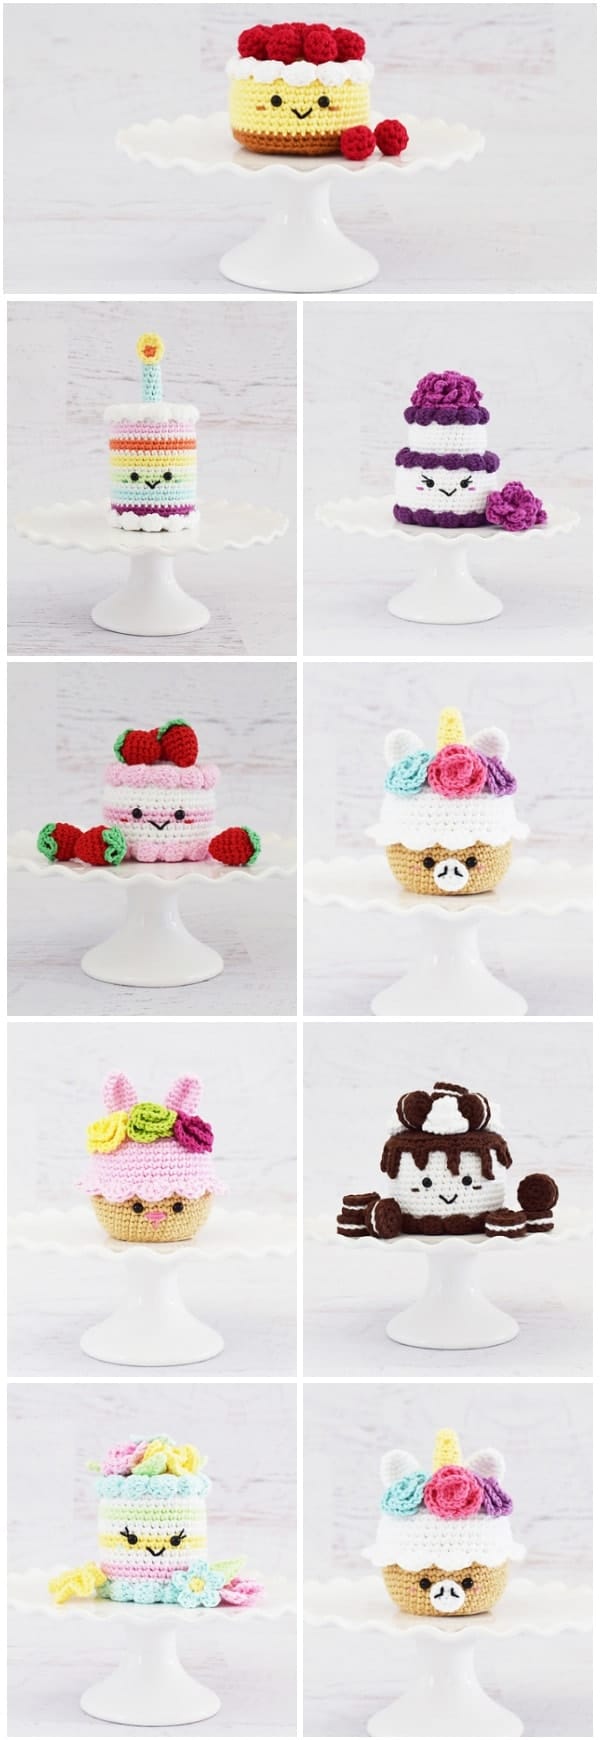 These Crochet Cupcake and cake Patterns can be a nice alternative to the usual plastic or rubber toys. Birthday candle adds lots of imagination to this sweet project. Enjoy, guys !